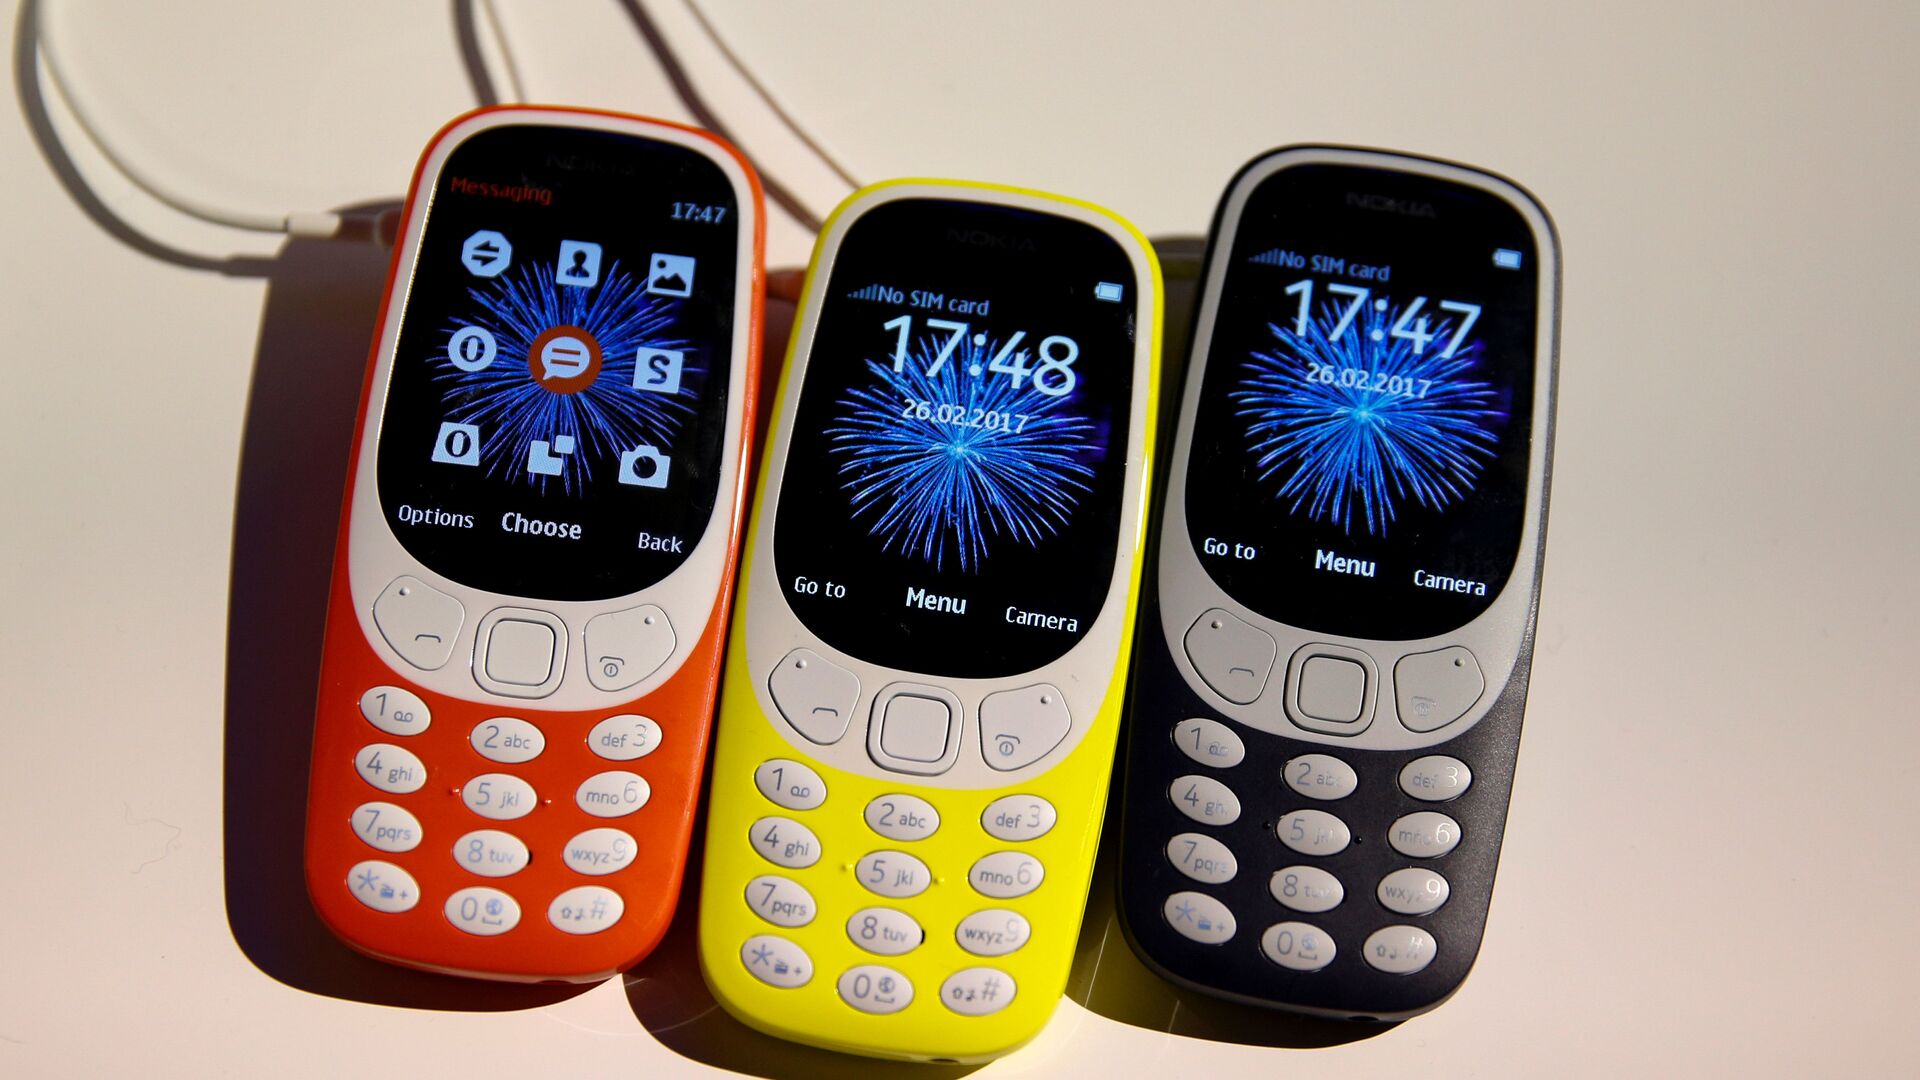 Nokia 3310 devices are displayed after their presentation ceremony at Mobile World Congress in Barcelona, Spain, February 26, 2017. - Sputnik Mundo, 1920, 08.08.2021